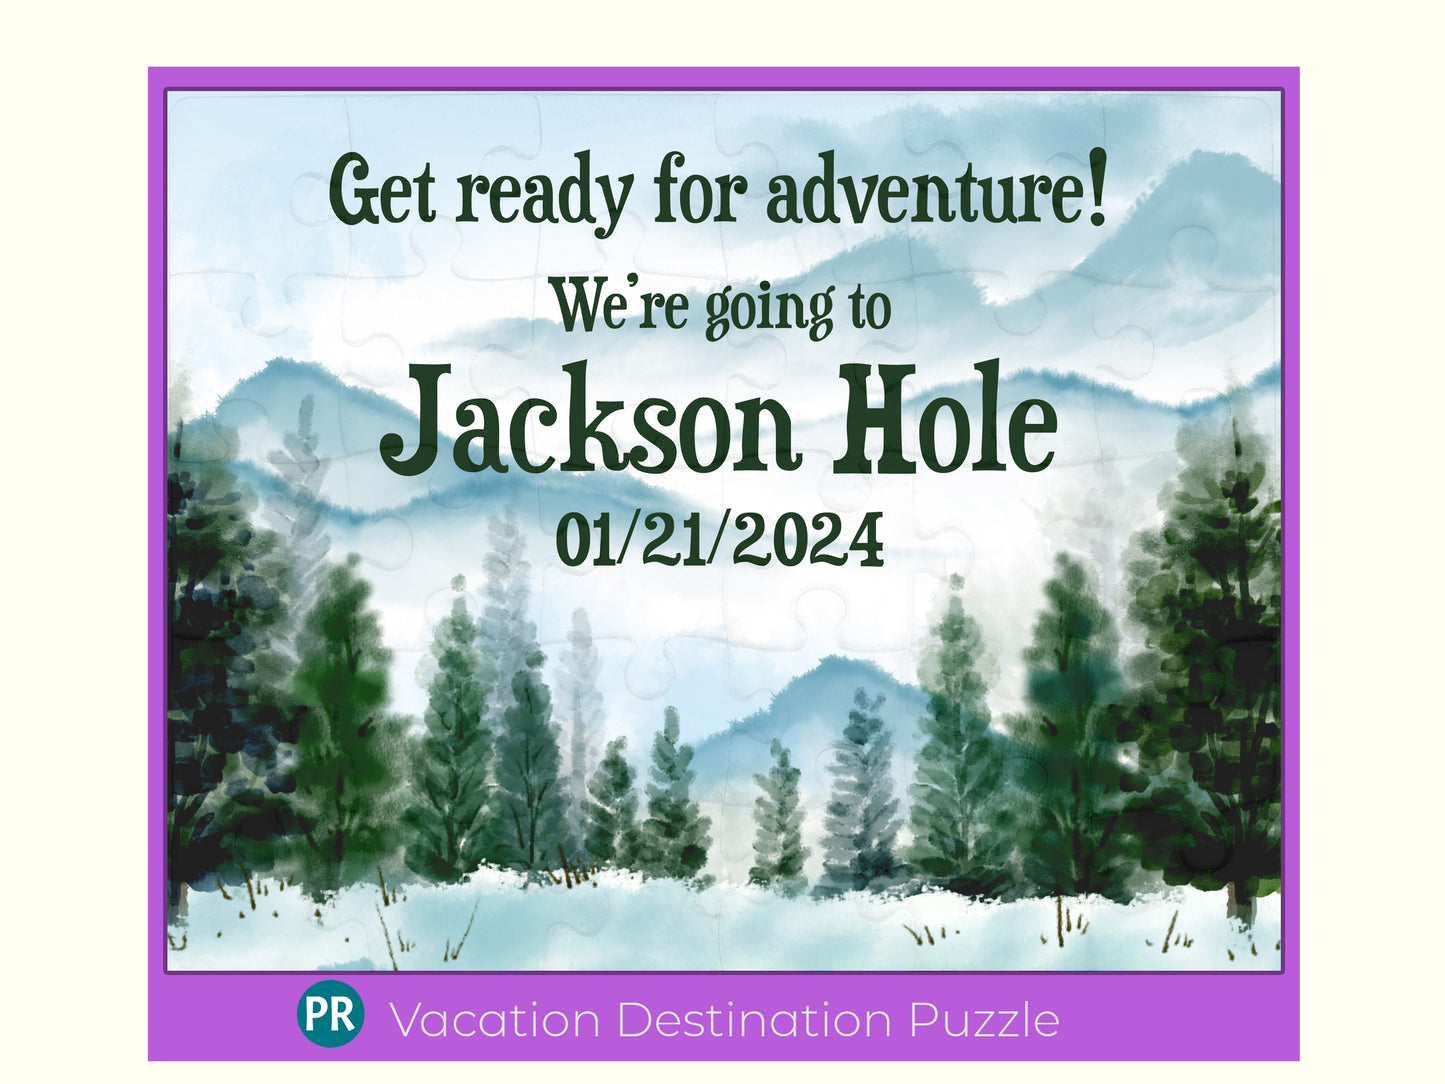 Winter Mountain Vacation Puzzle Reveal with Custom Message, Snow Ski Trip, Snowboarding, Hiking, Unique Personalized Gift